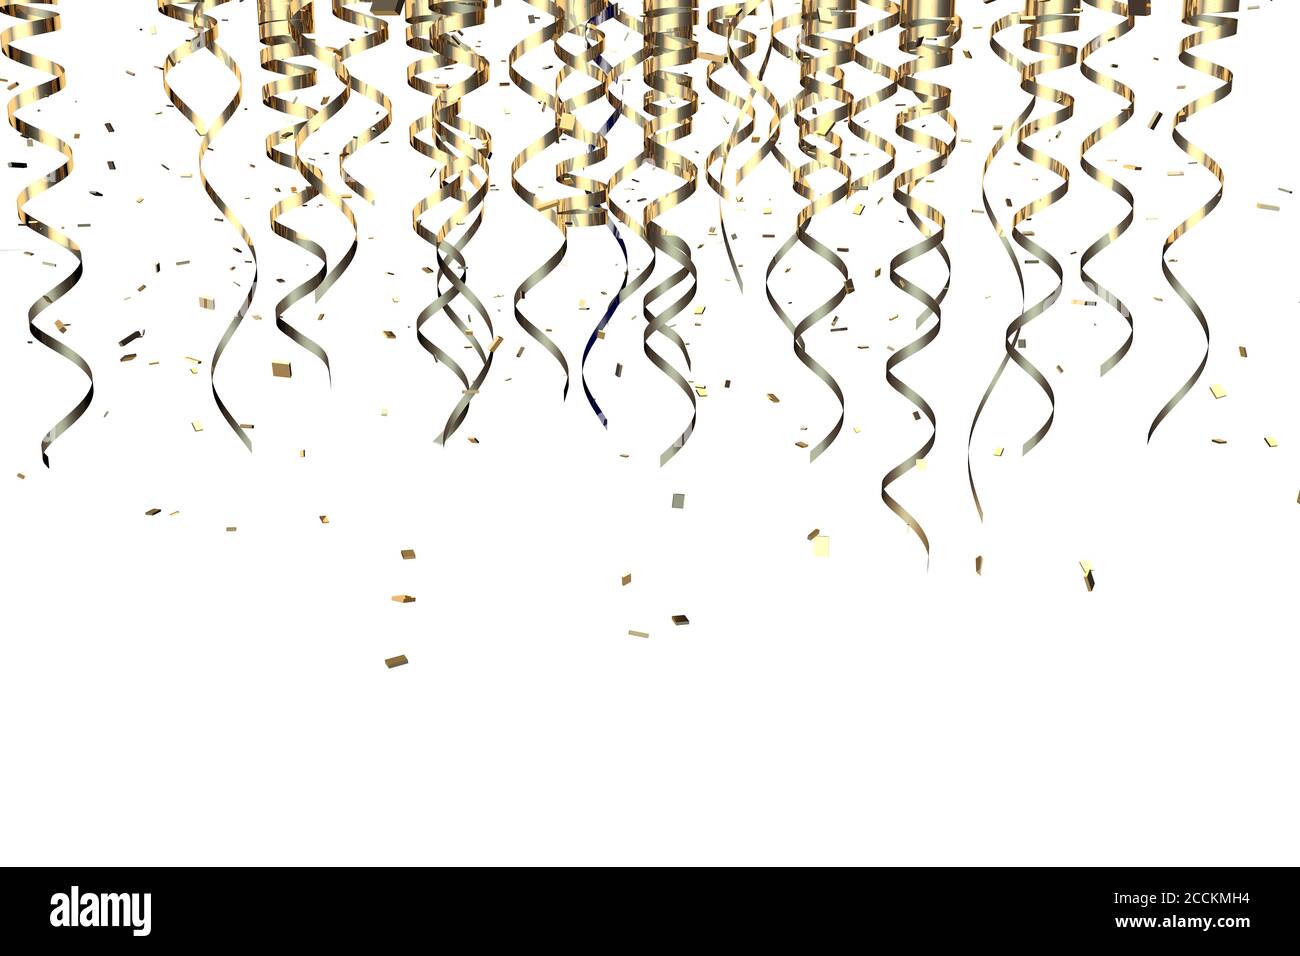 3d illustration render concepts of gold streamers isolated on a white background as a template background Stock Photo